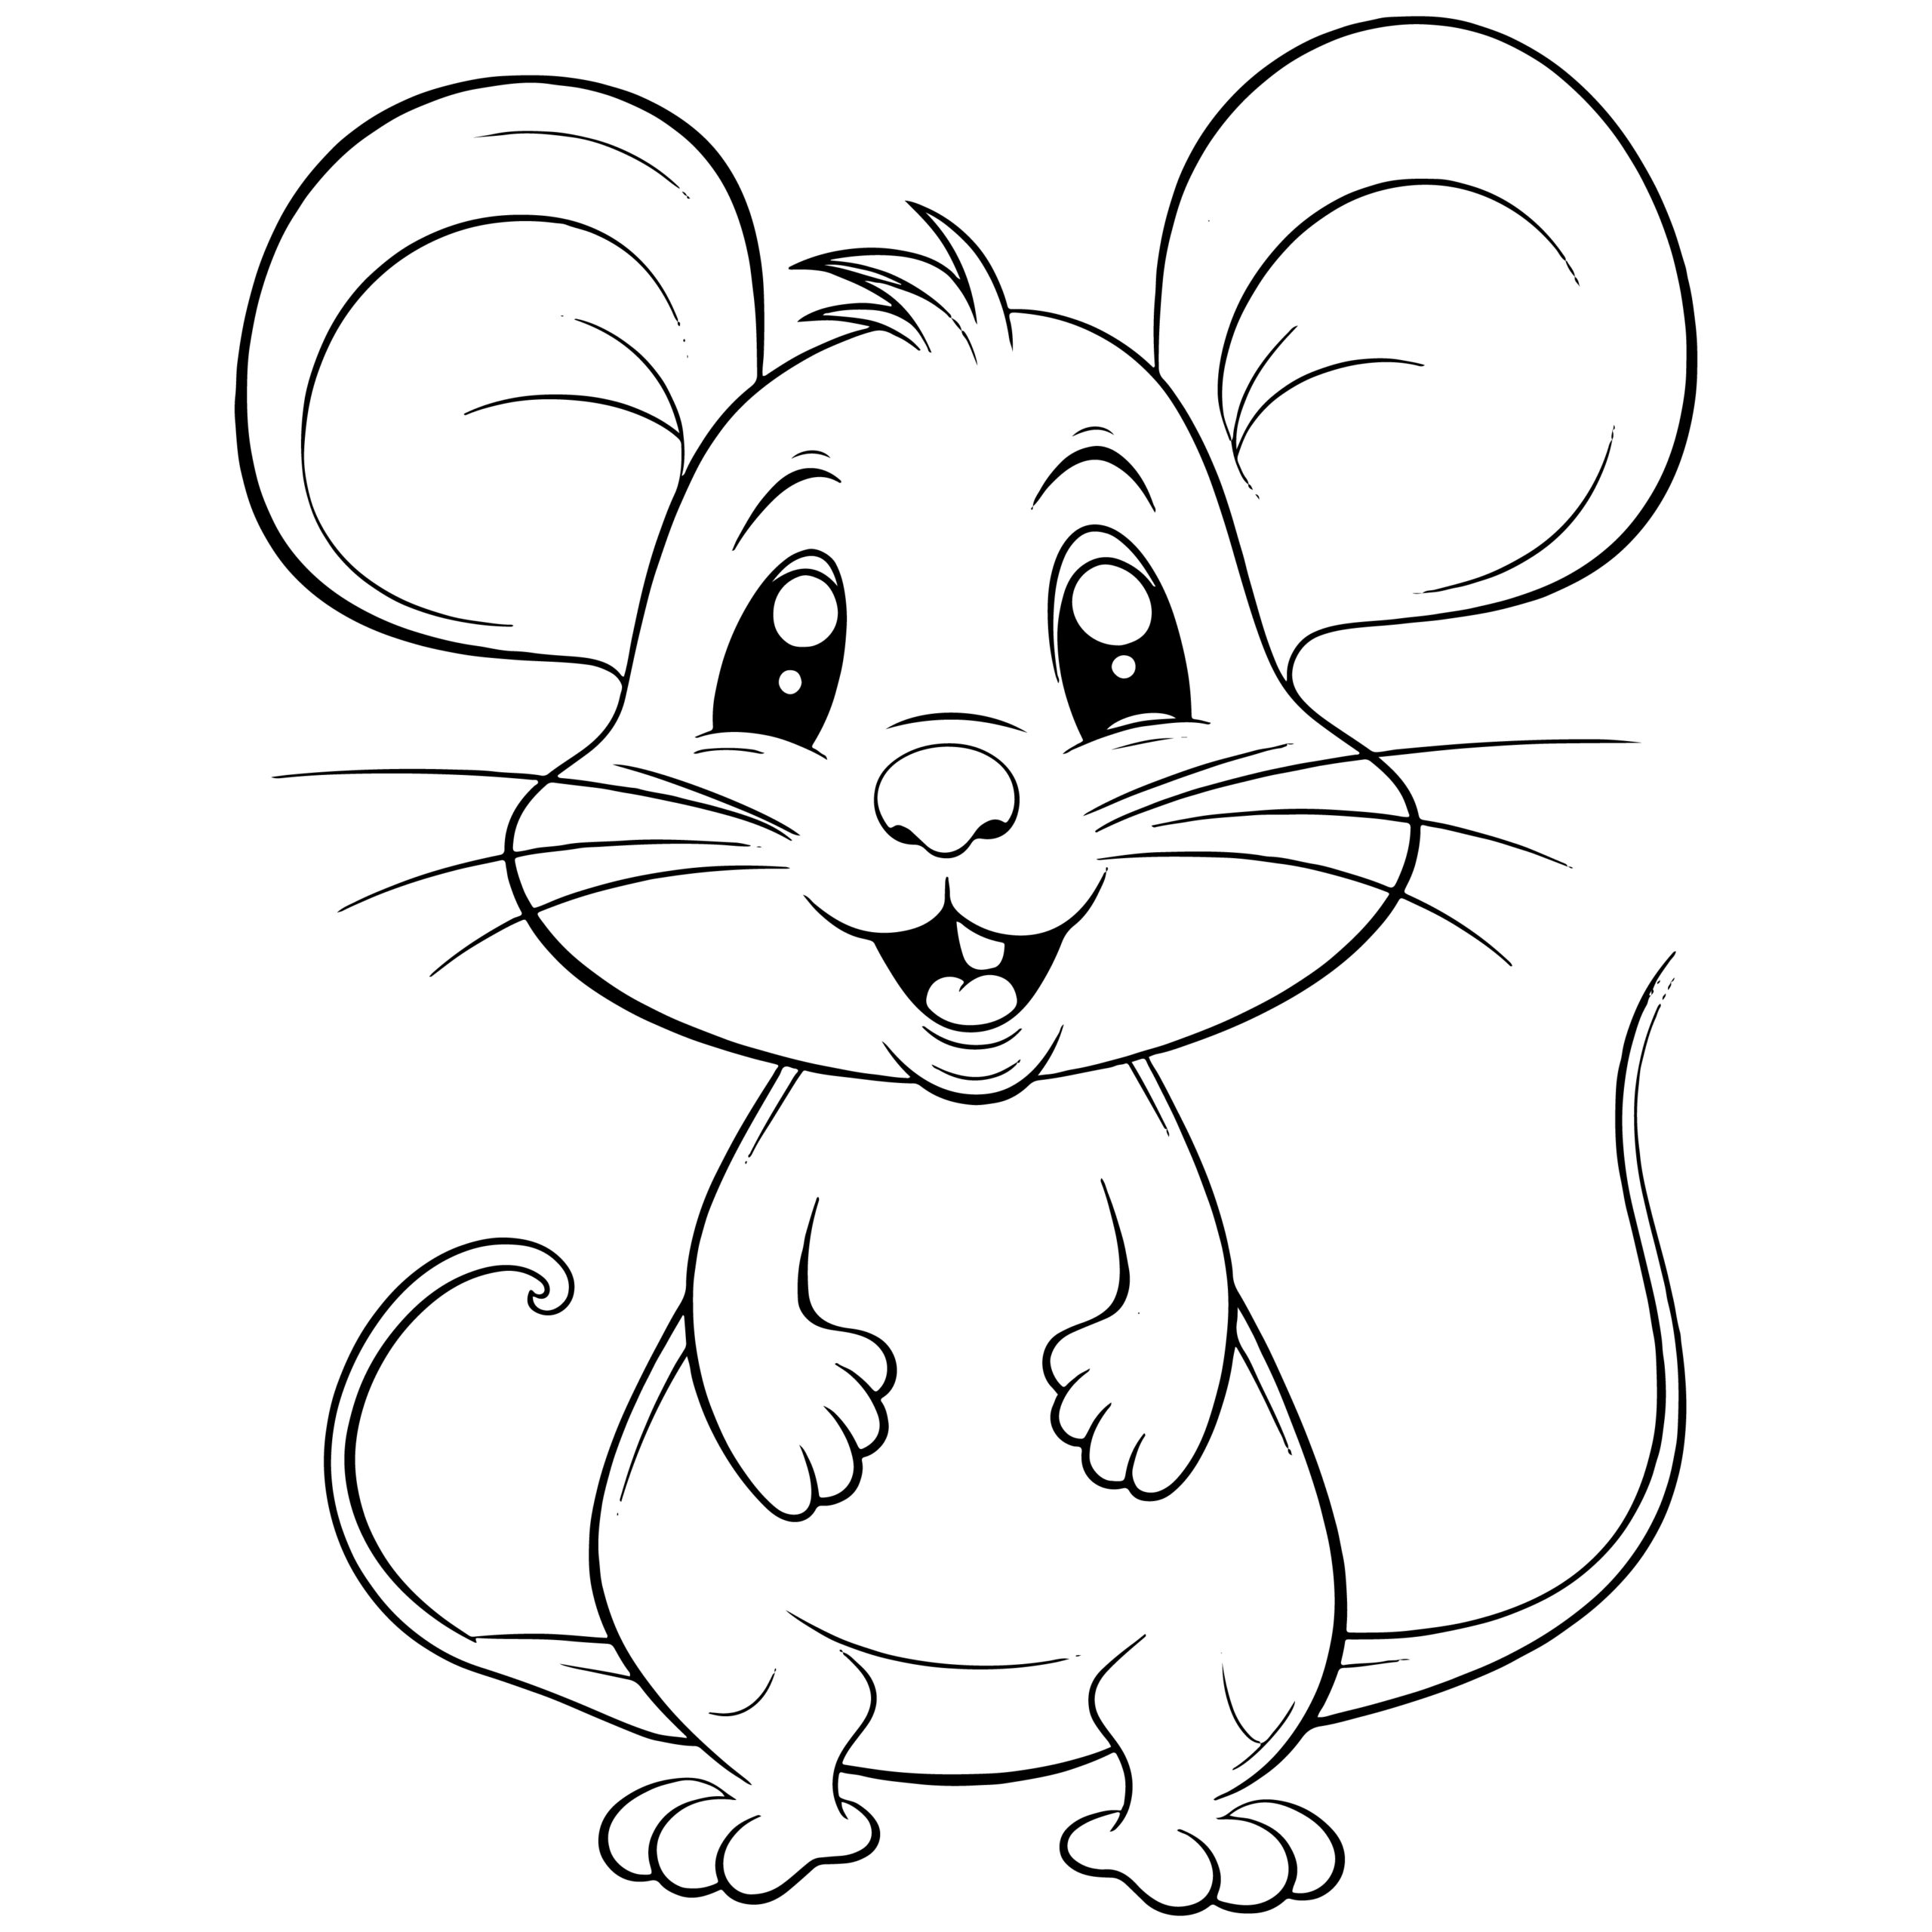 Mice coloring book fun with some adorable mice coloring pages made by teachers